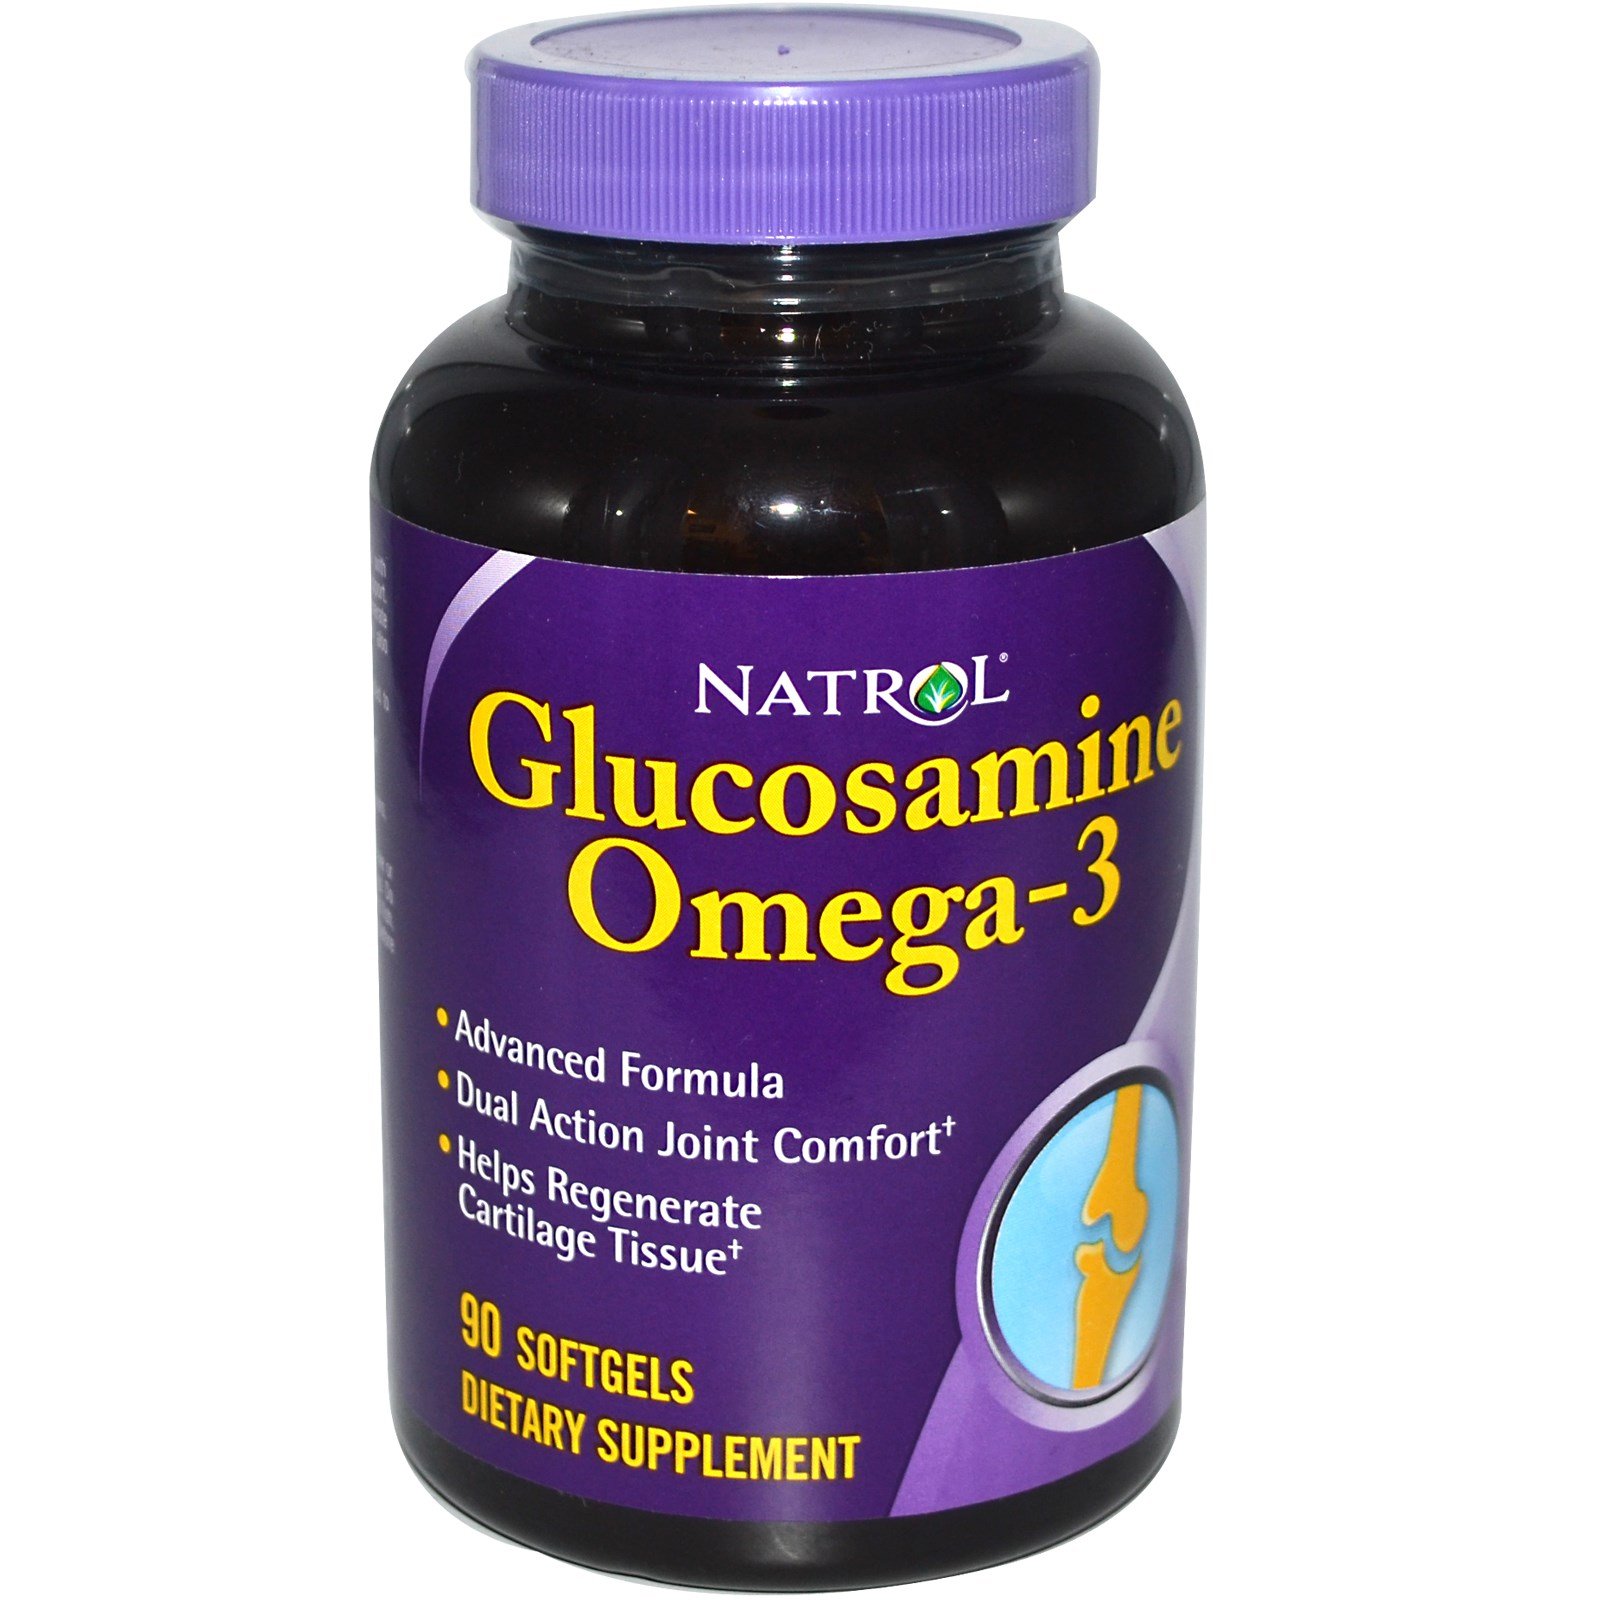 Glucosamine Omega-3, 90 pcs, Natrol. For joints and ligaments. General Health Ligament and Joint strengthening 